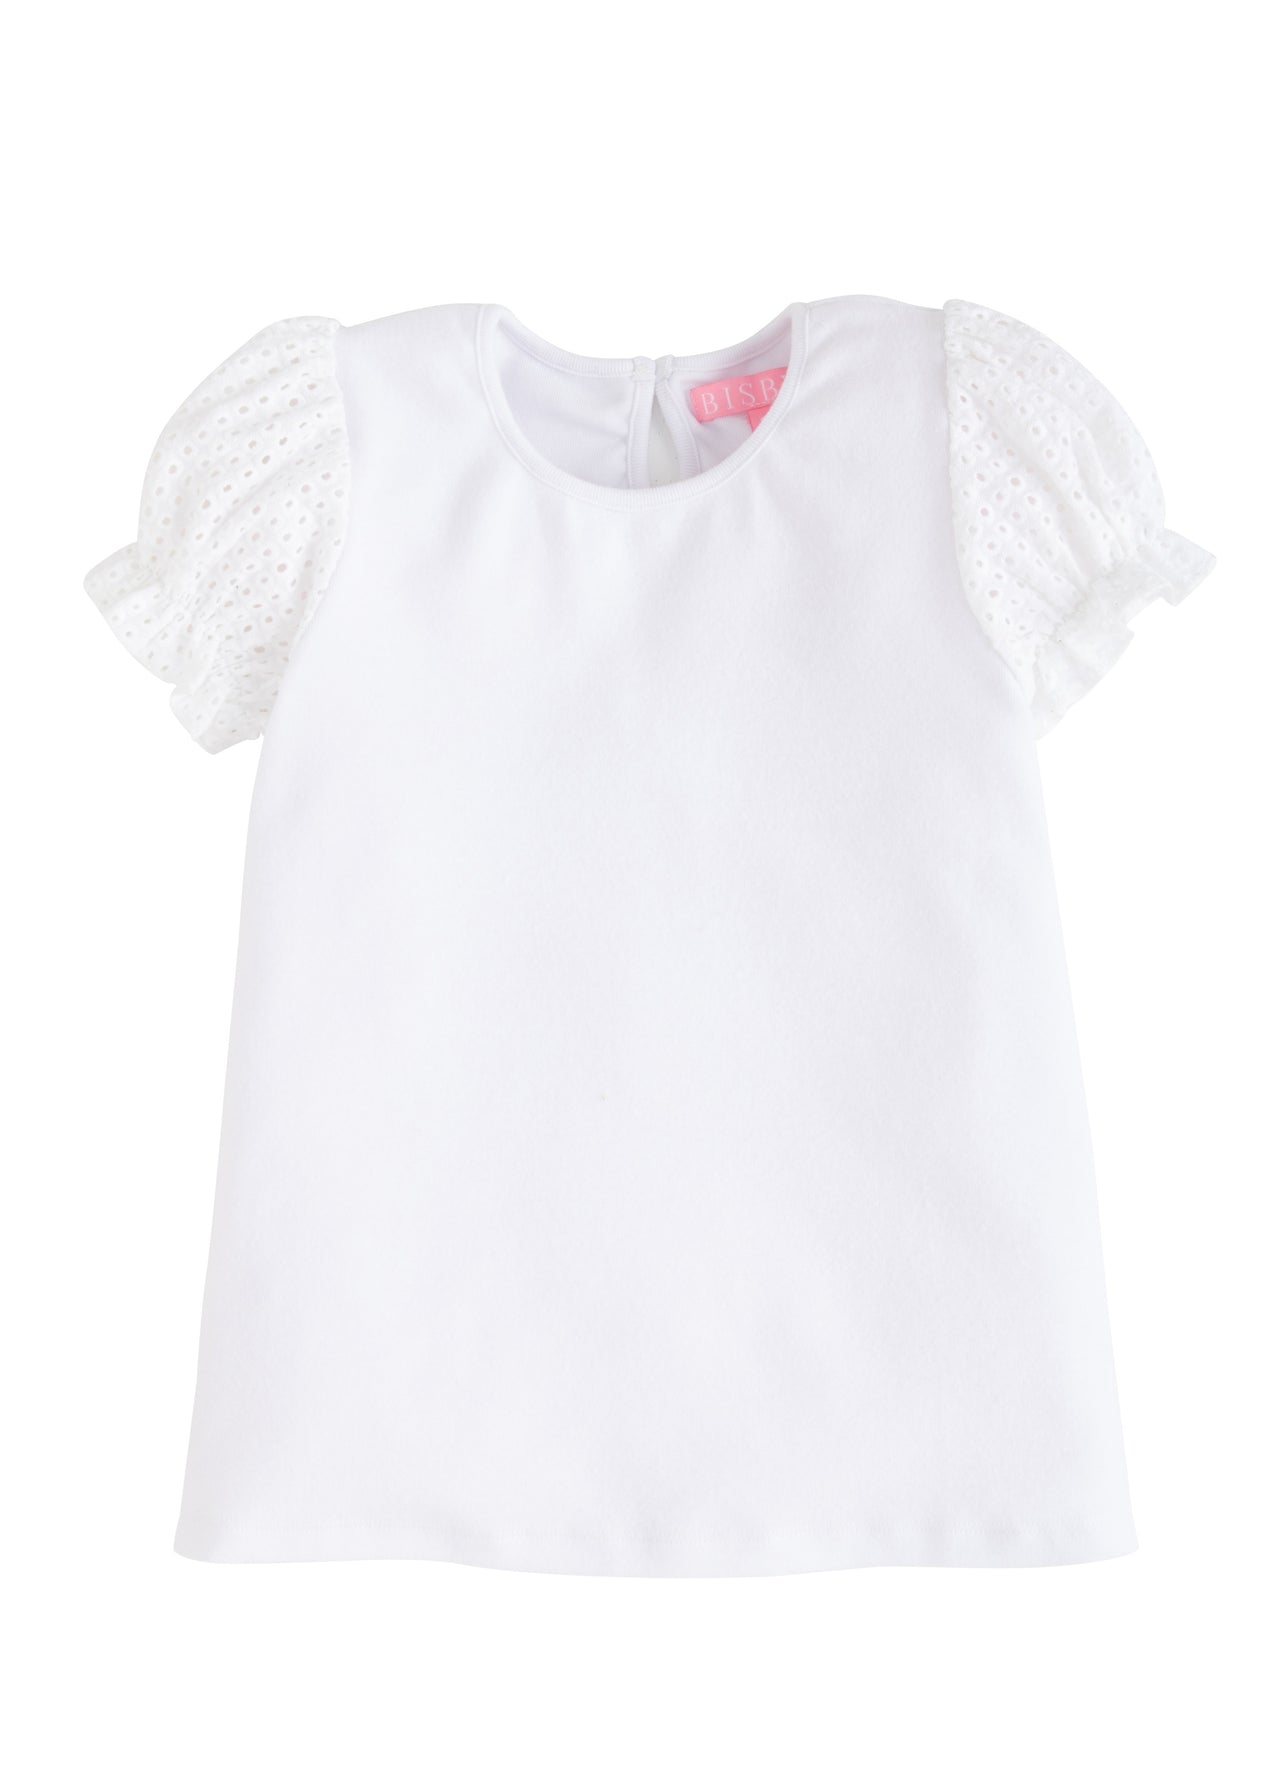 Bisby Contrast Sleeve tee White Eyelet BS2021 5103